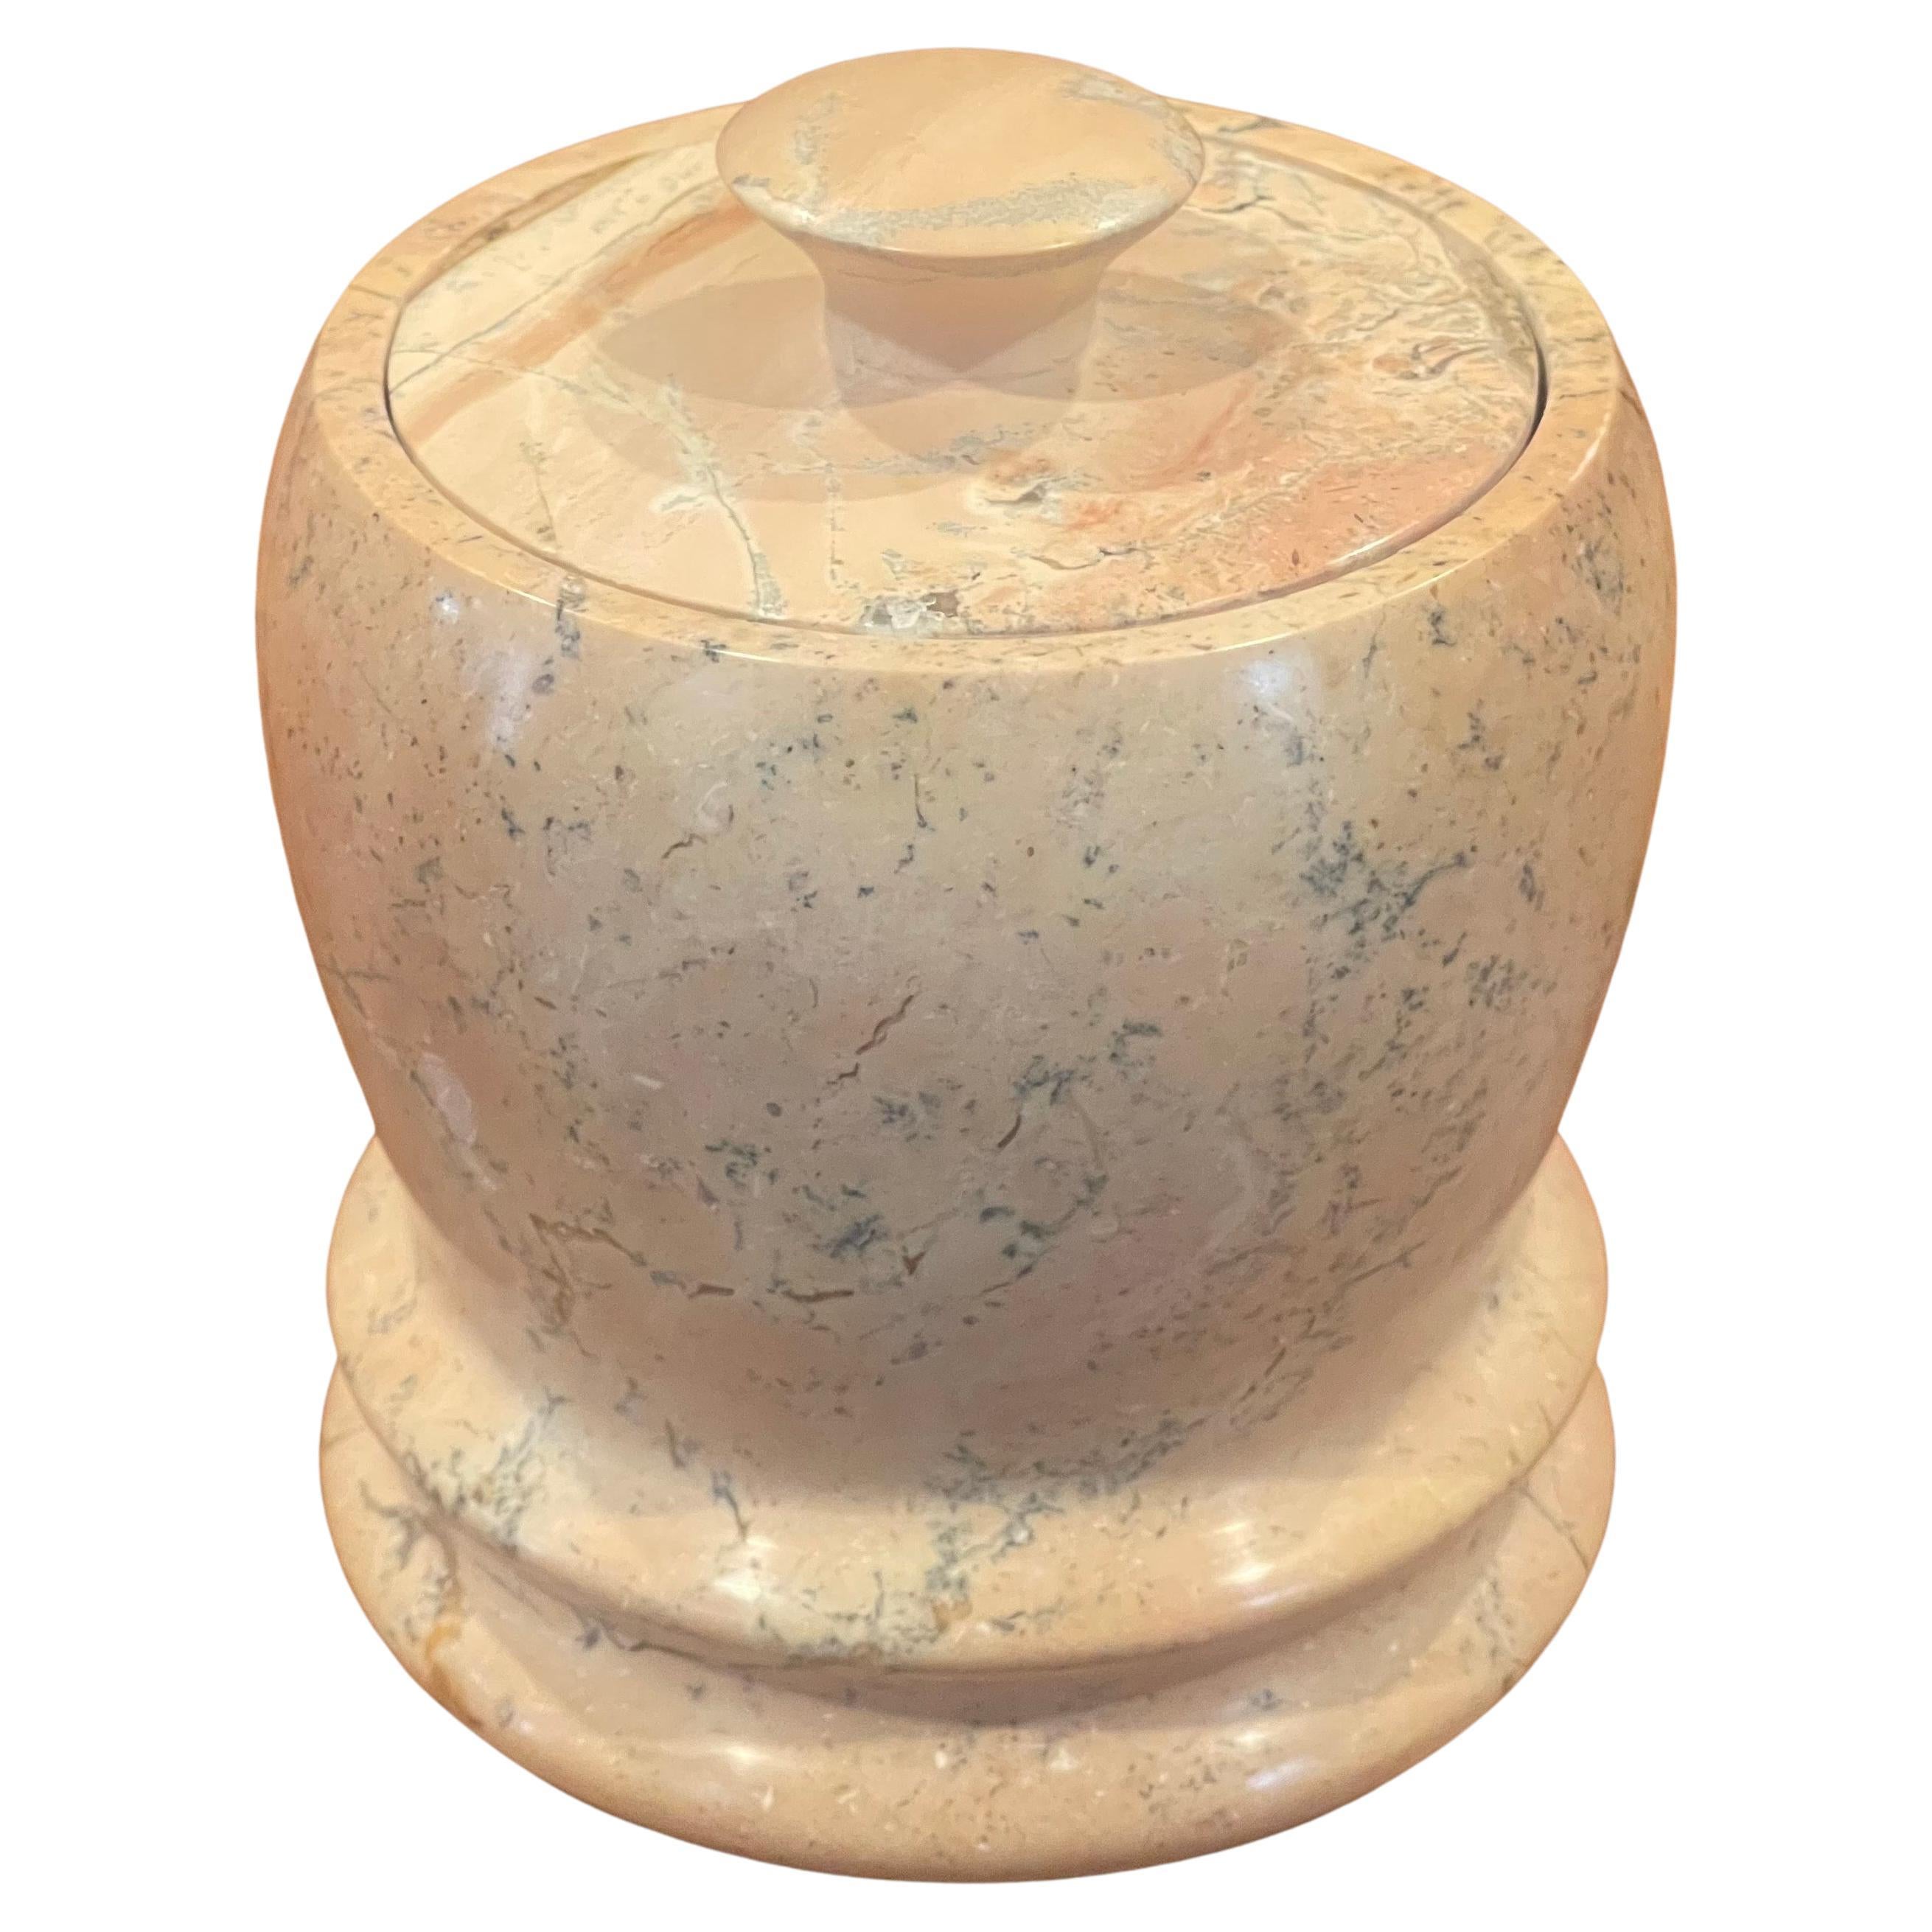 Post-modern Italian marble lidded jar, circa 1970s. The jar is in very good vintage condition with no chips or cracks and measures 4